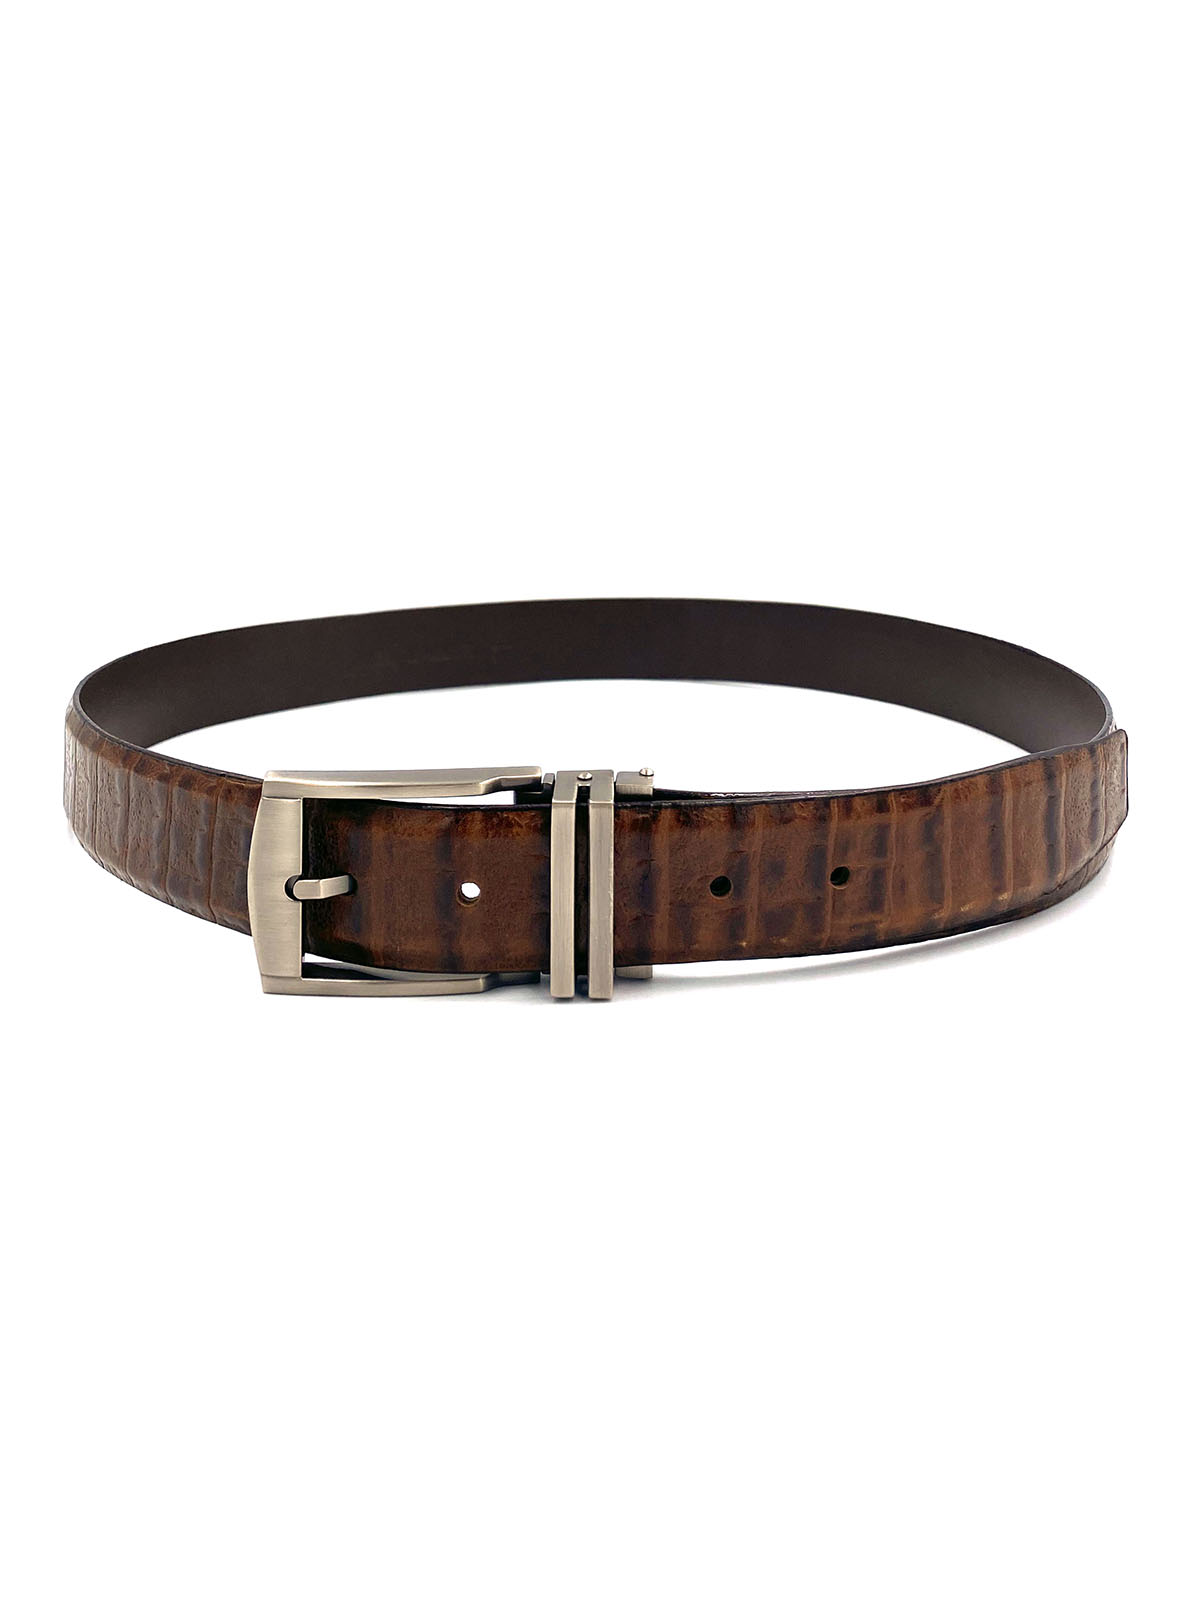 Leather belt in brown - 10412 - € 21.37 img2